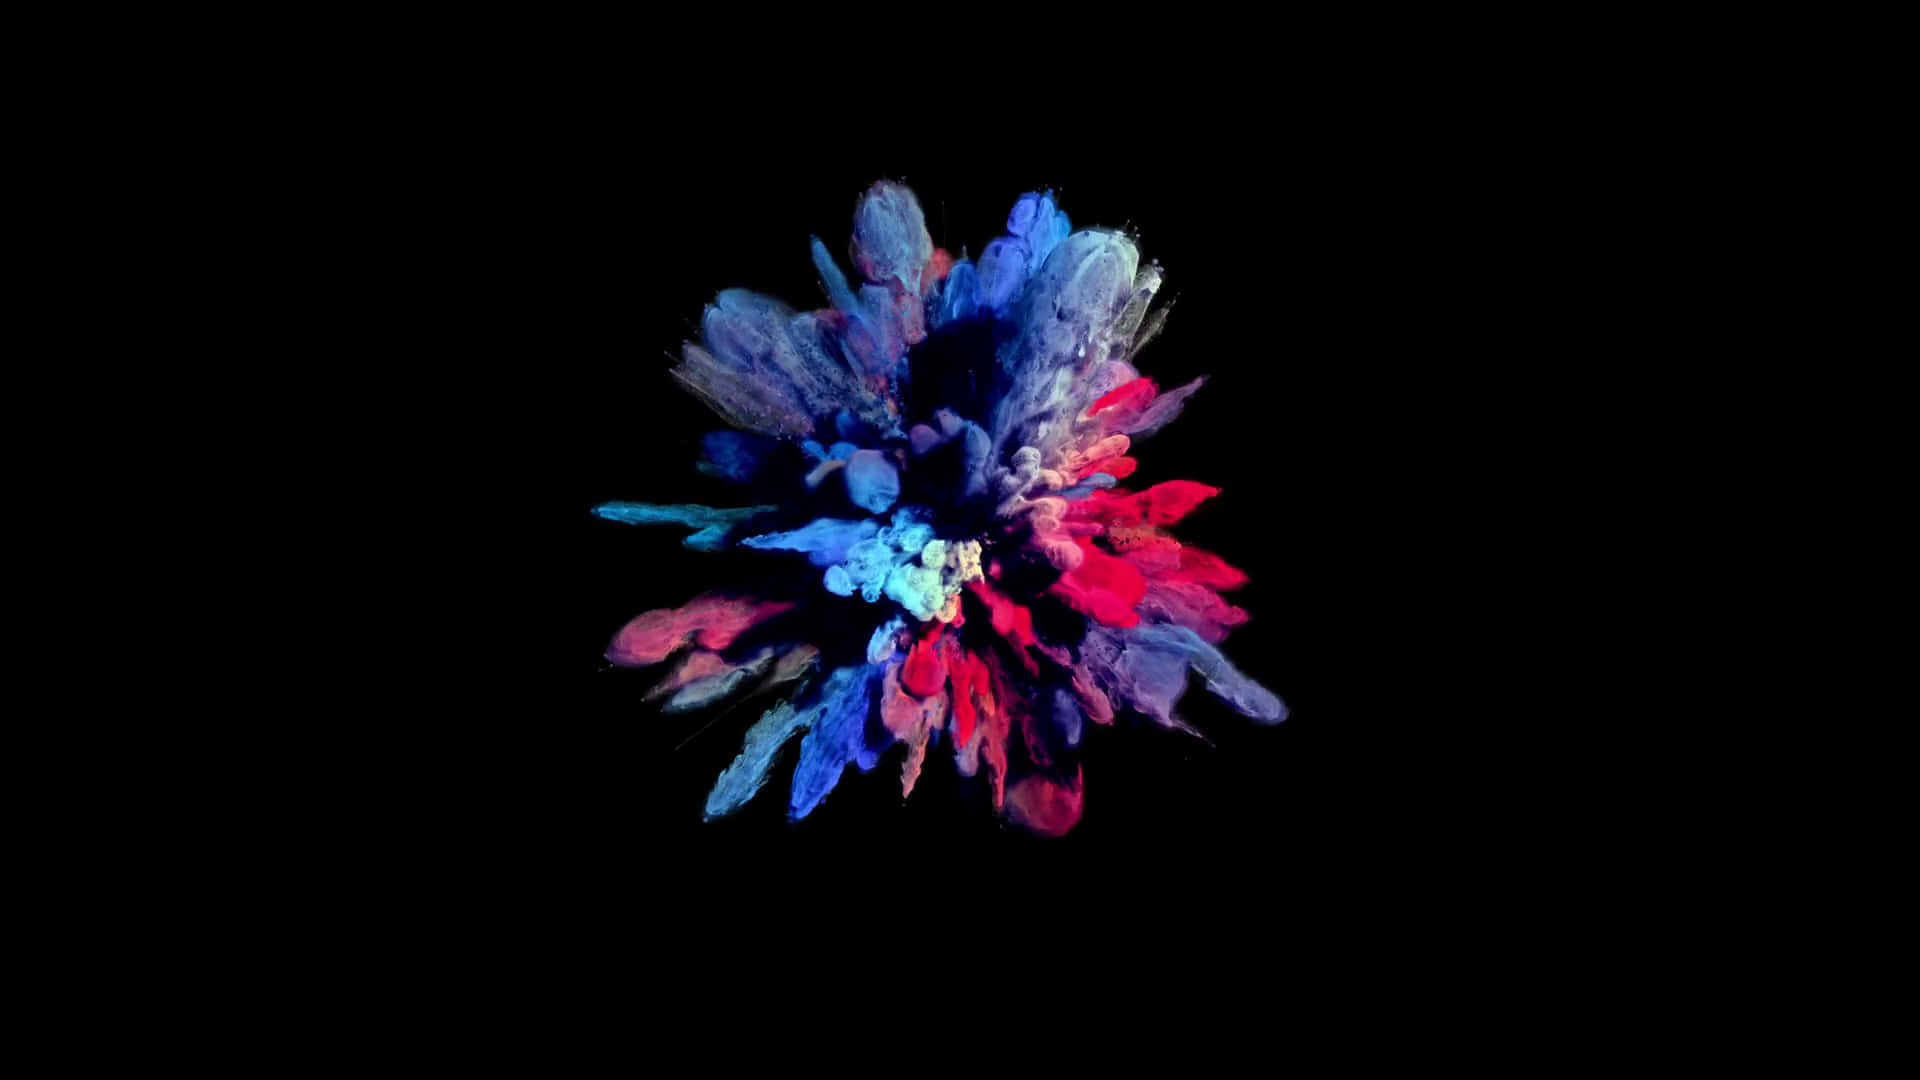 A Colorful Flower Is Shown On A Black Background